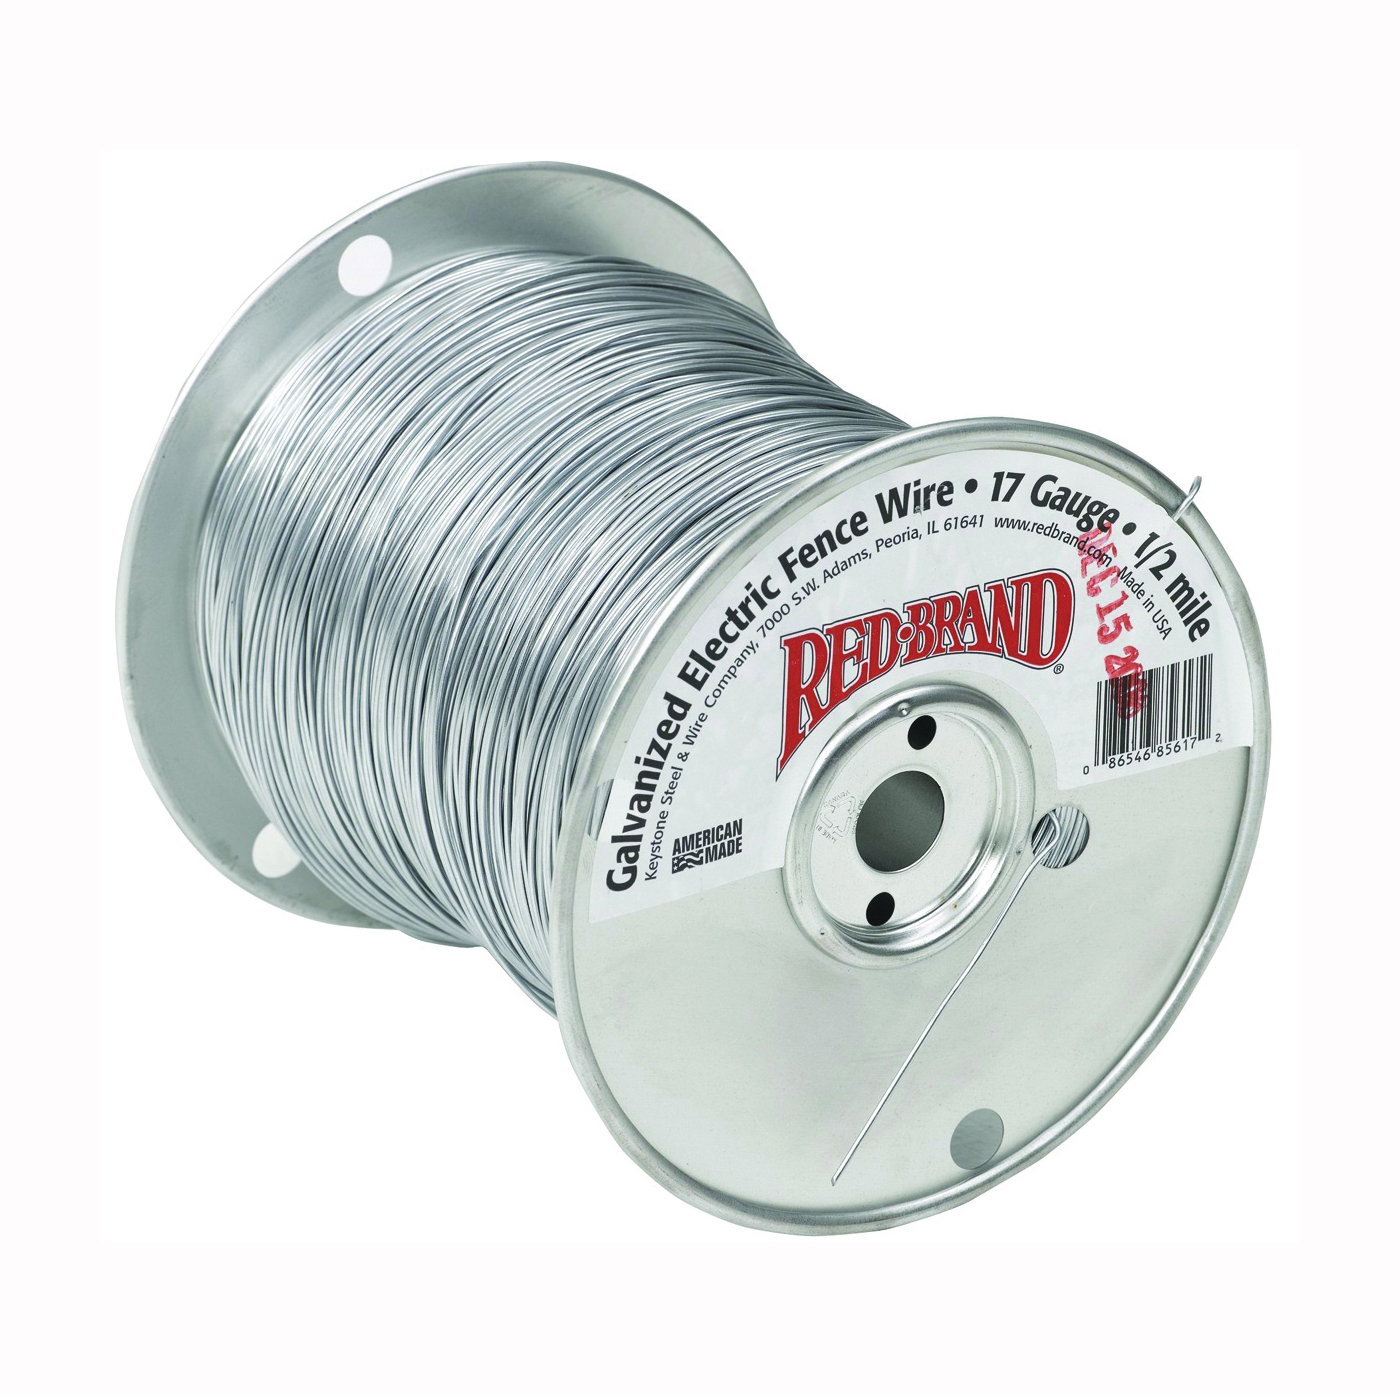 85617 Electric Fence Wire, 17 ga Wire, Steel Conductor, 1/2 mile L